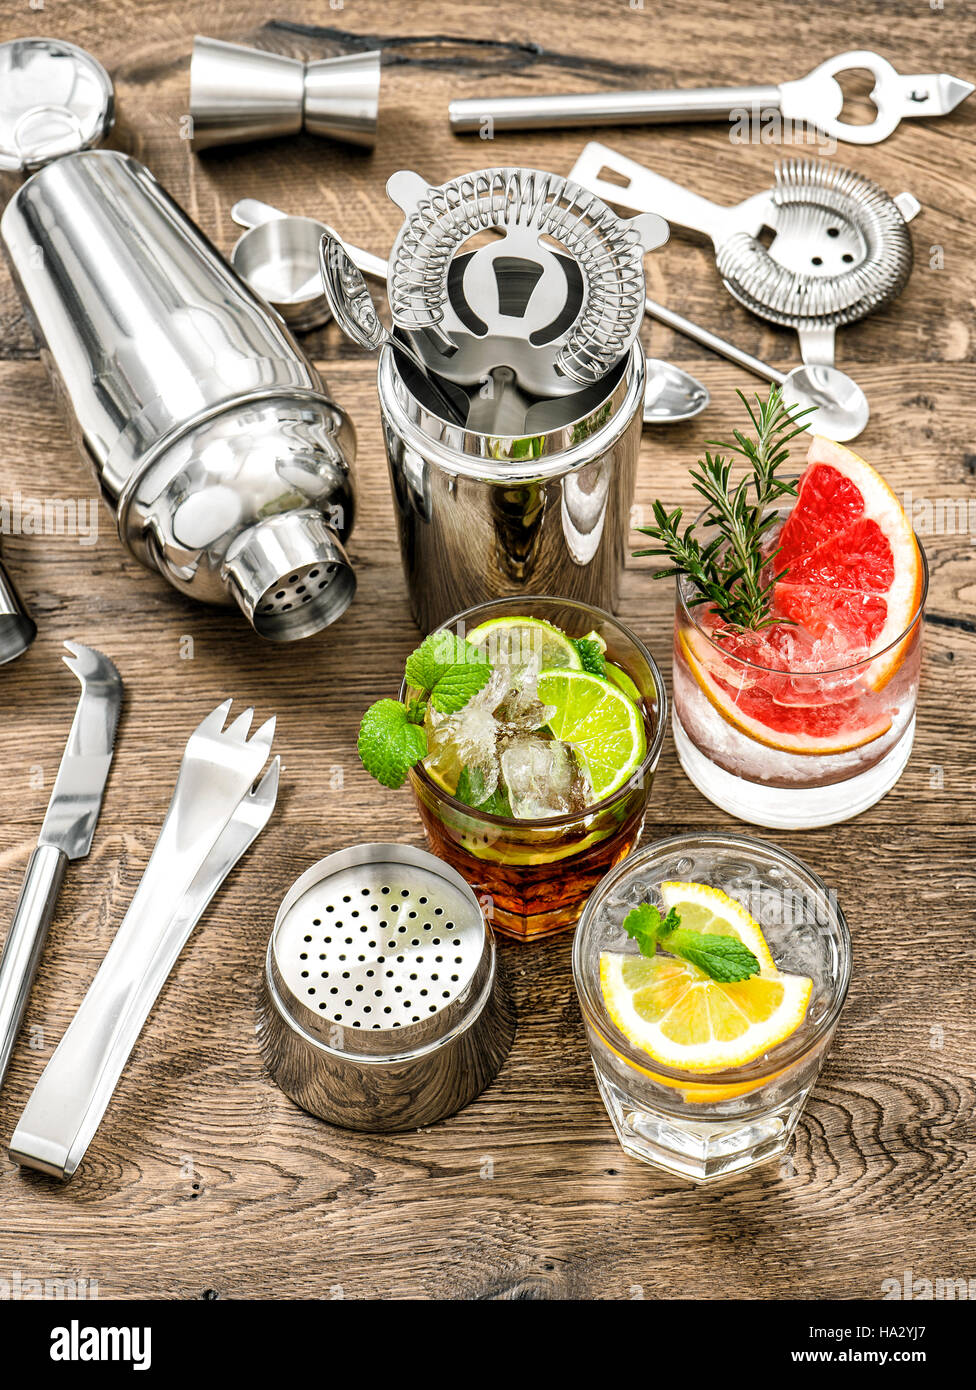 Cocktails with fruits and ice. Juice. Aperitif. Bar drink making tools Stock Photo